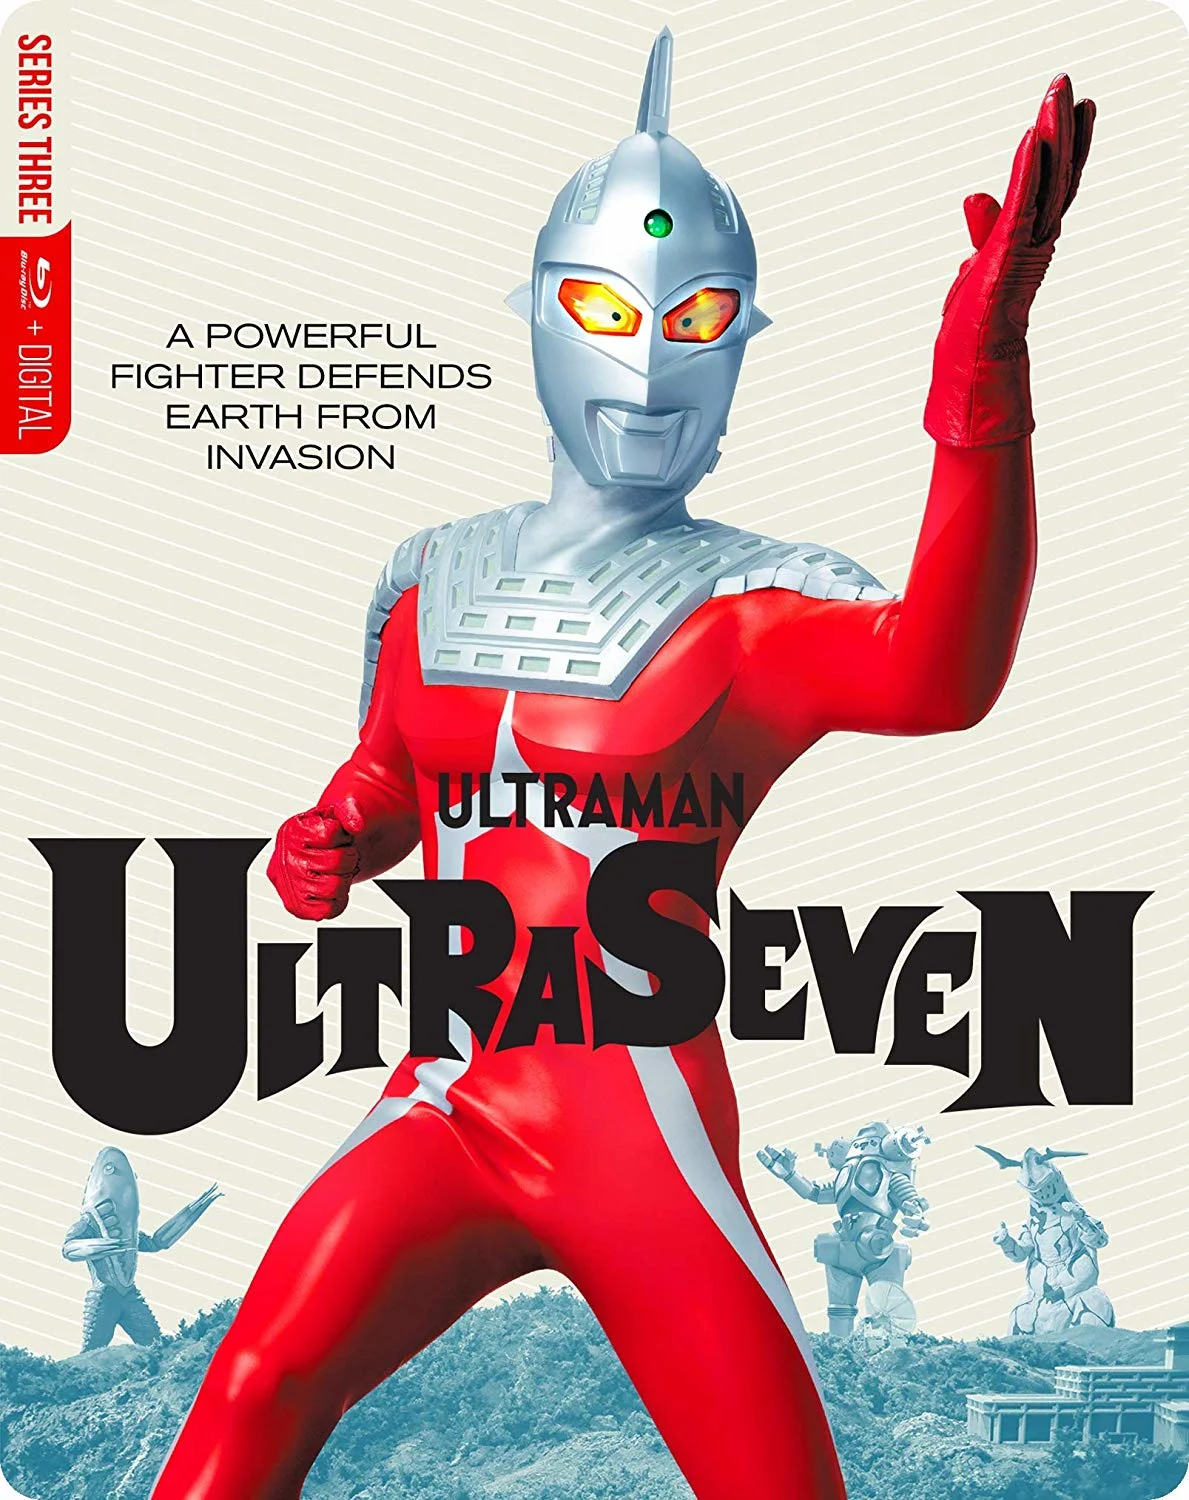 Ultraseven: Complete Series (Blu-ray) on MovieShack